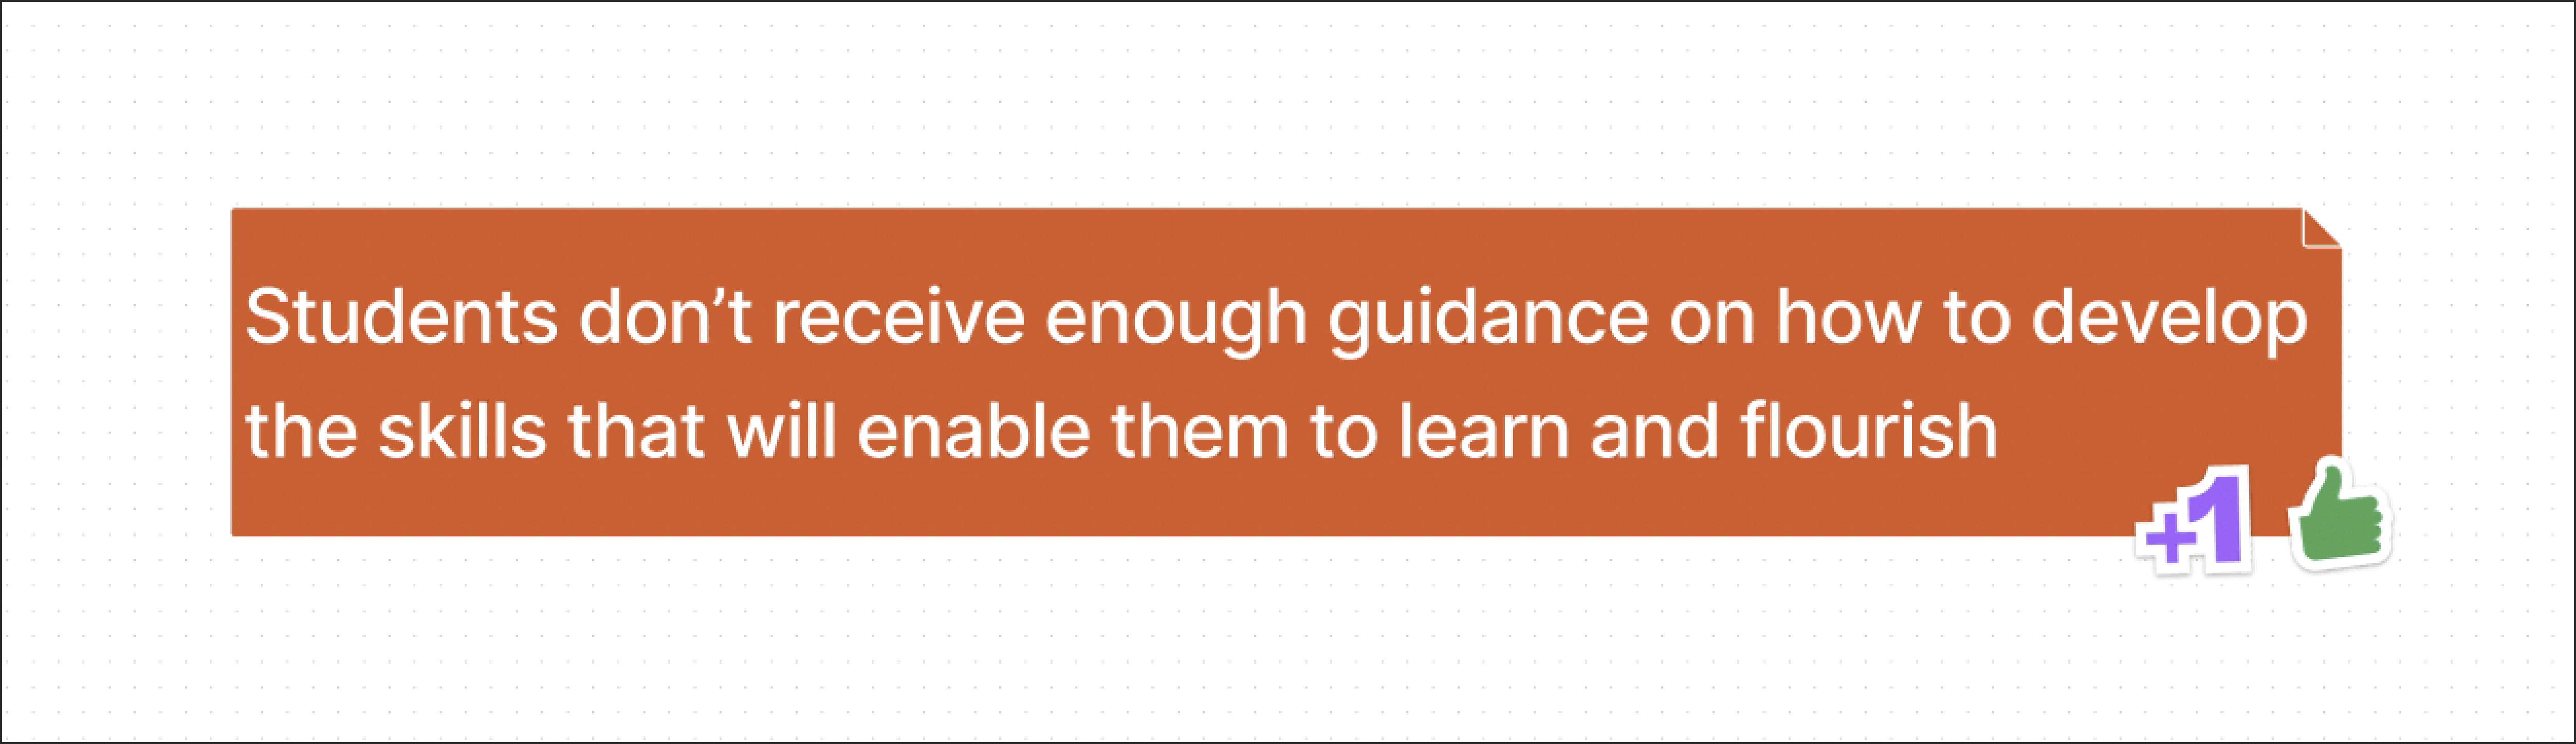 Problem statement stating, "Students don't receive enough guidance on how to develop the skills that will enable them to learn and flourish"